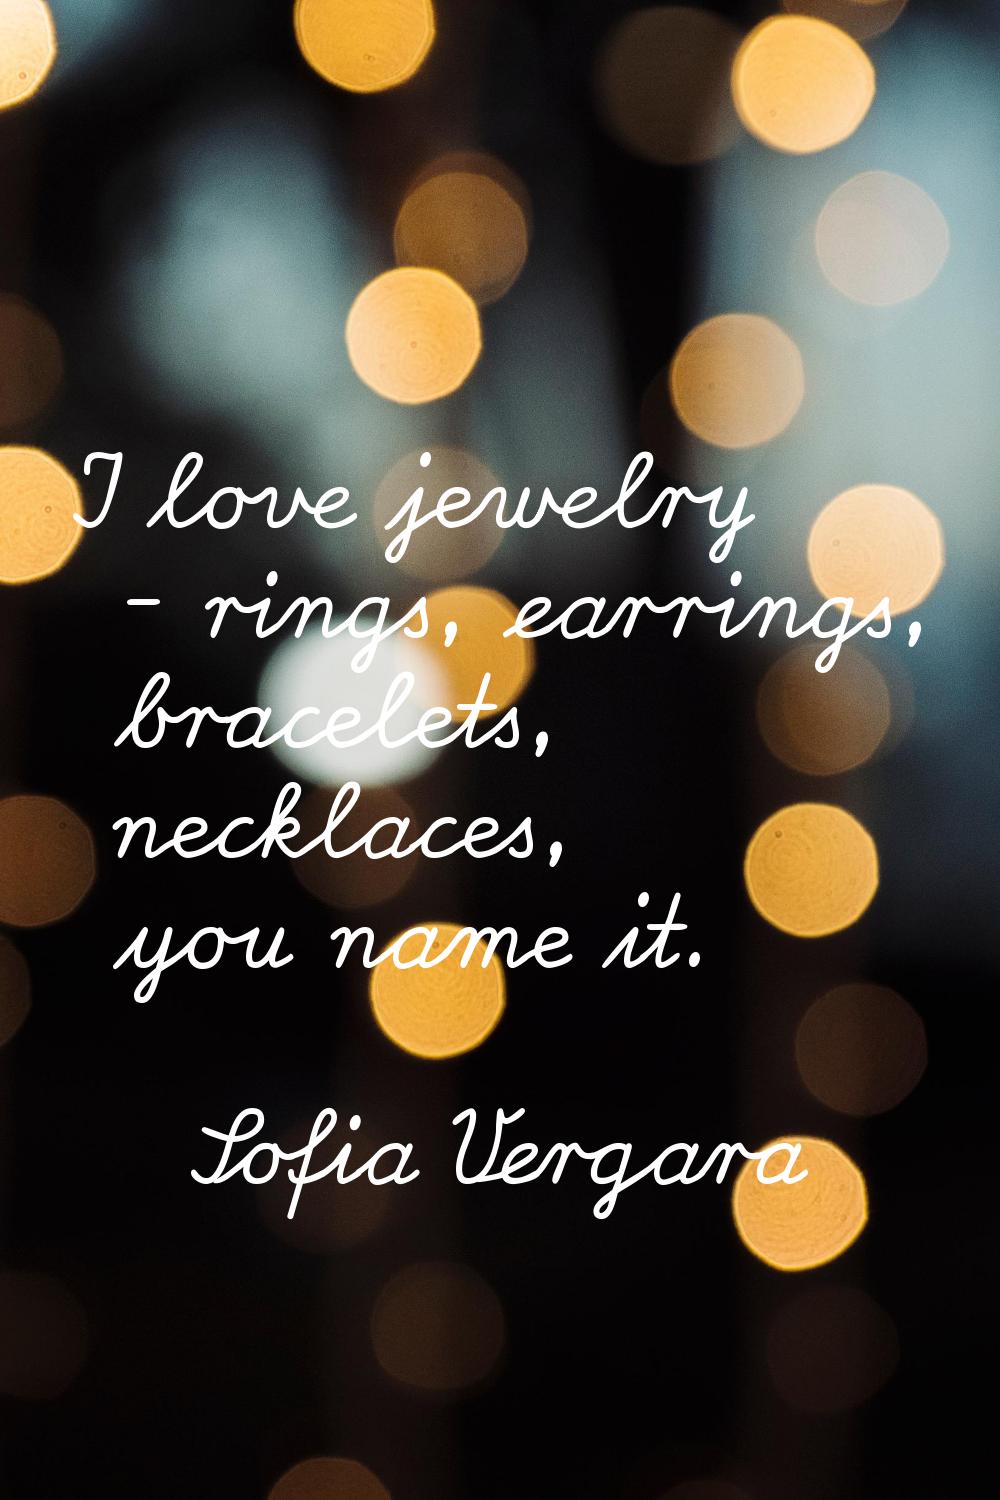 I love jewelry - rings, earrings, bracelets, necklaces, you name it.